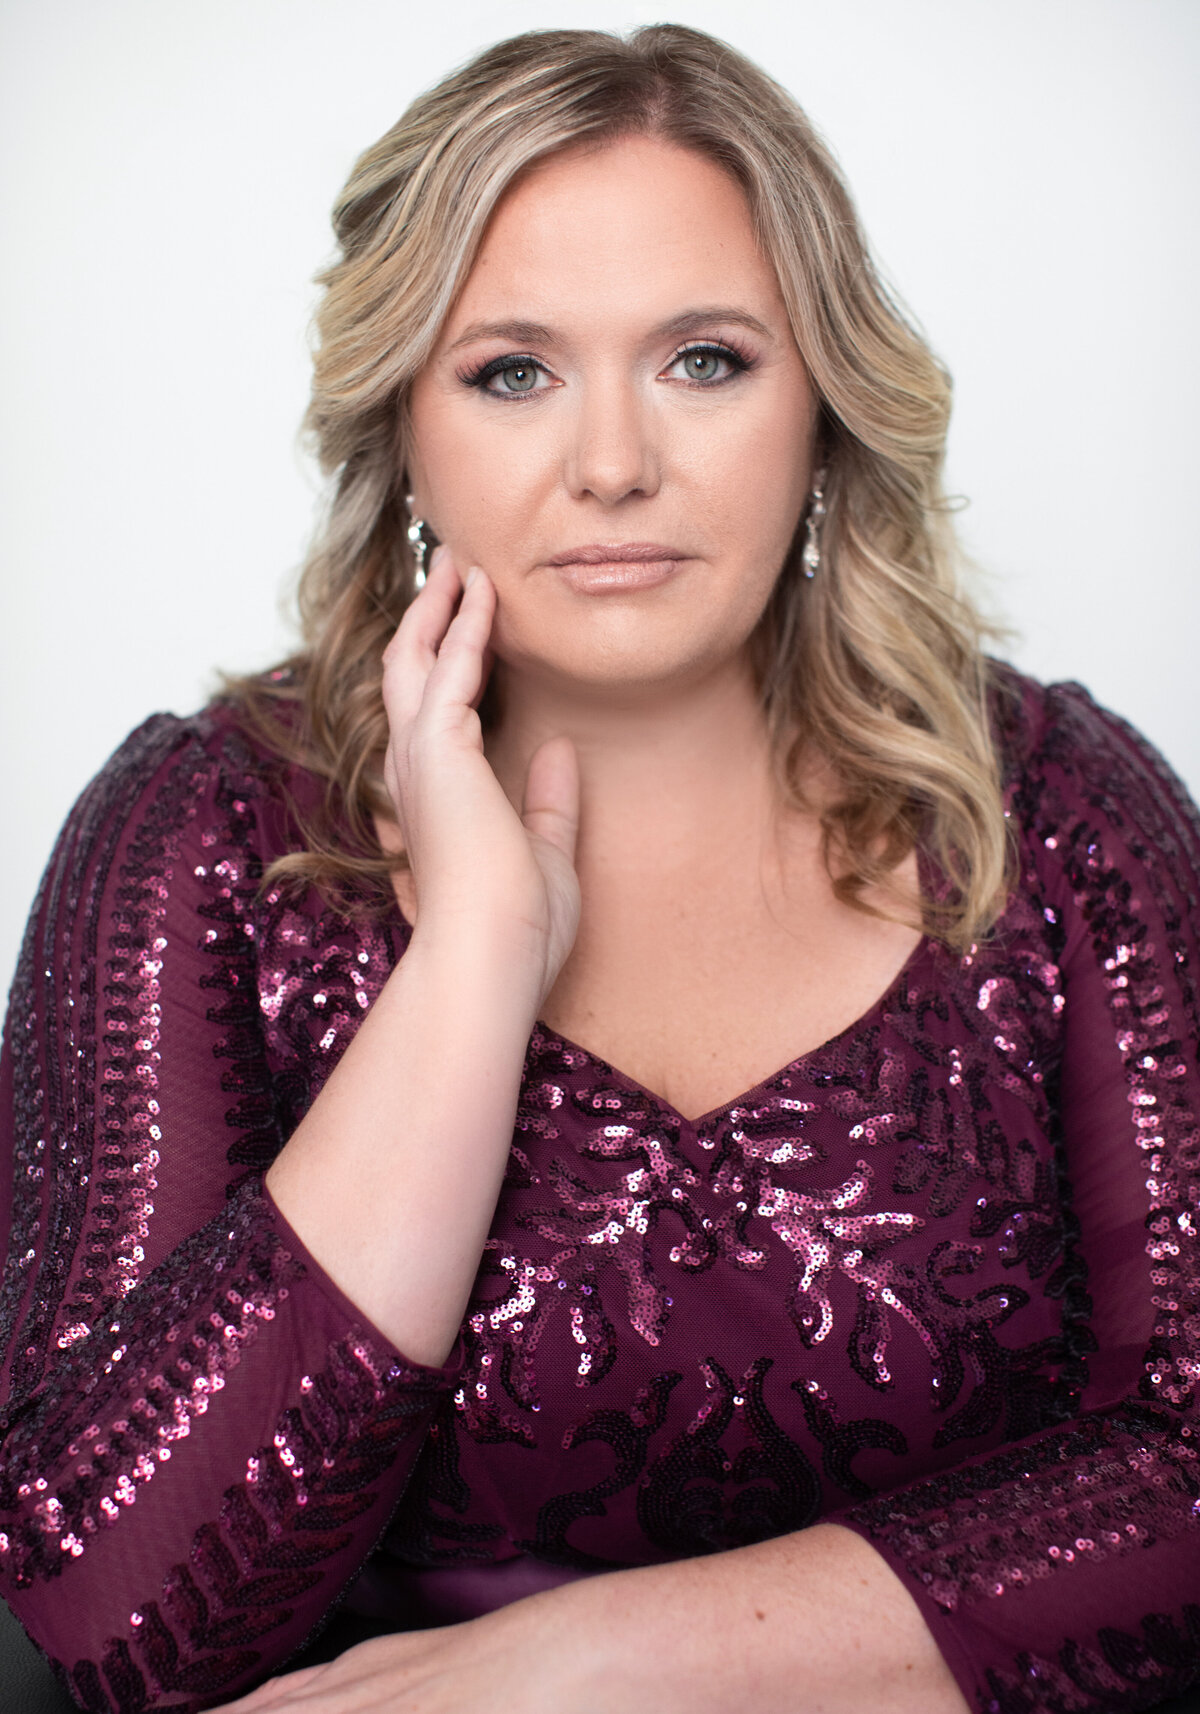 A blonde woman with red sequin dress touches her face and with an intense stare expression poses for a portrait at Janel Lee Photography studios in Cincinnati Ohio